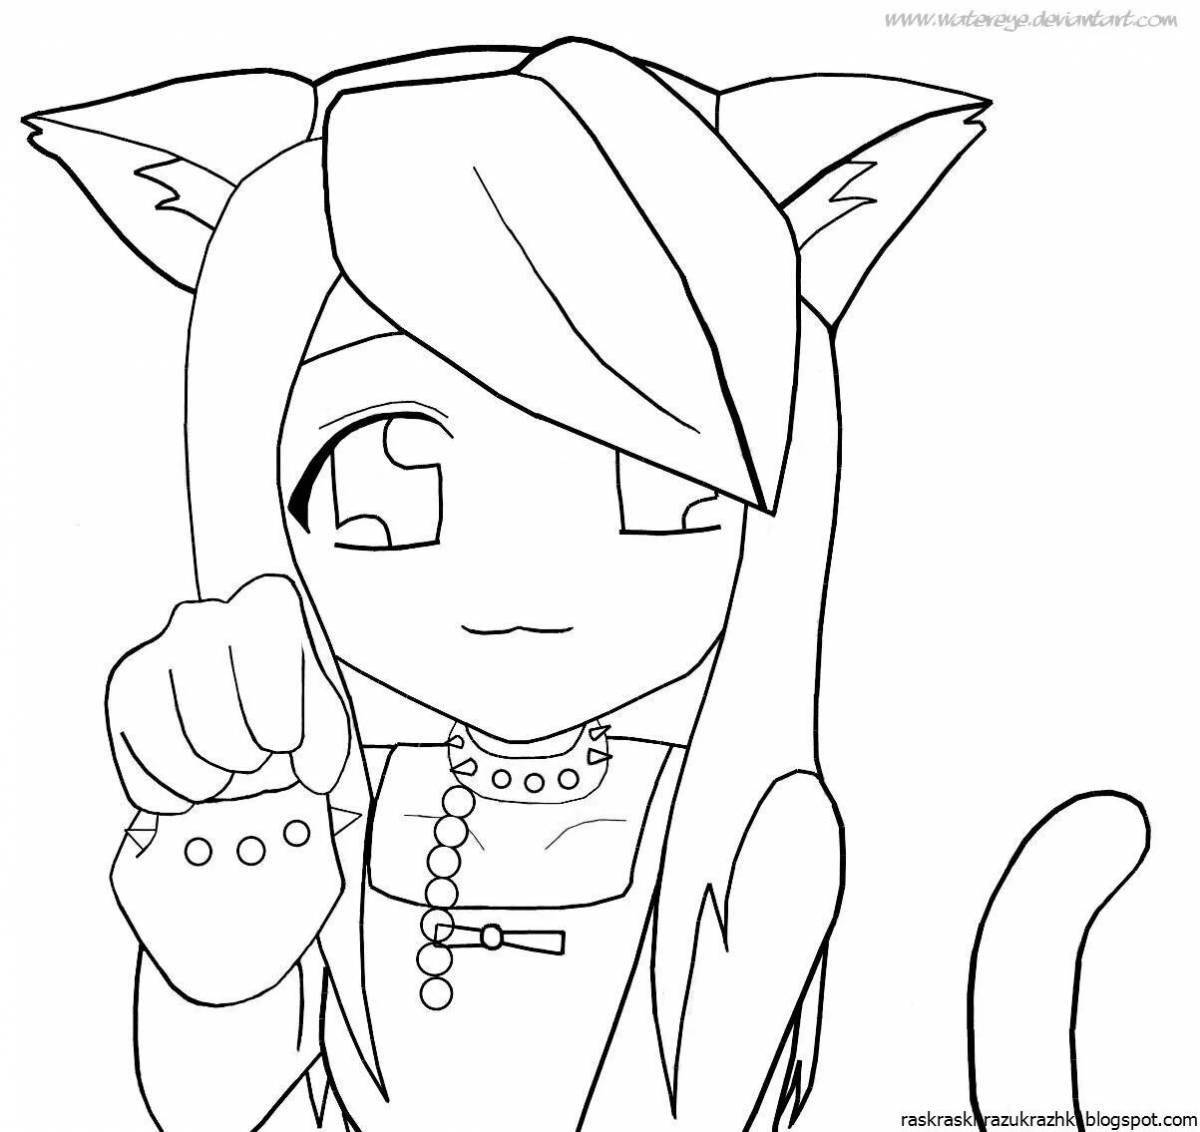 Witty cat girl coloring book